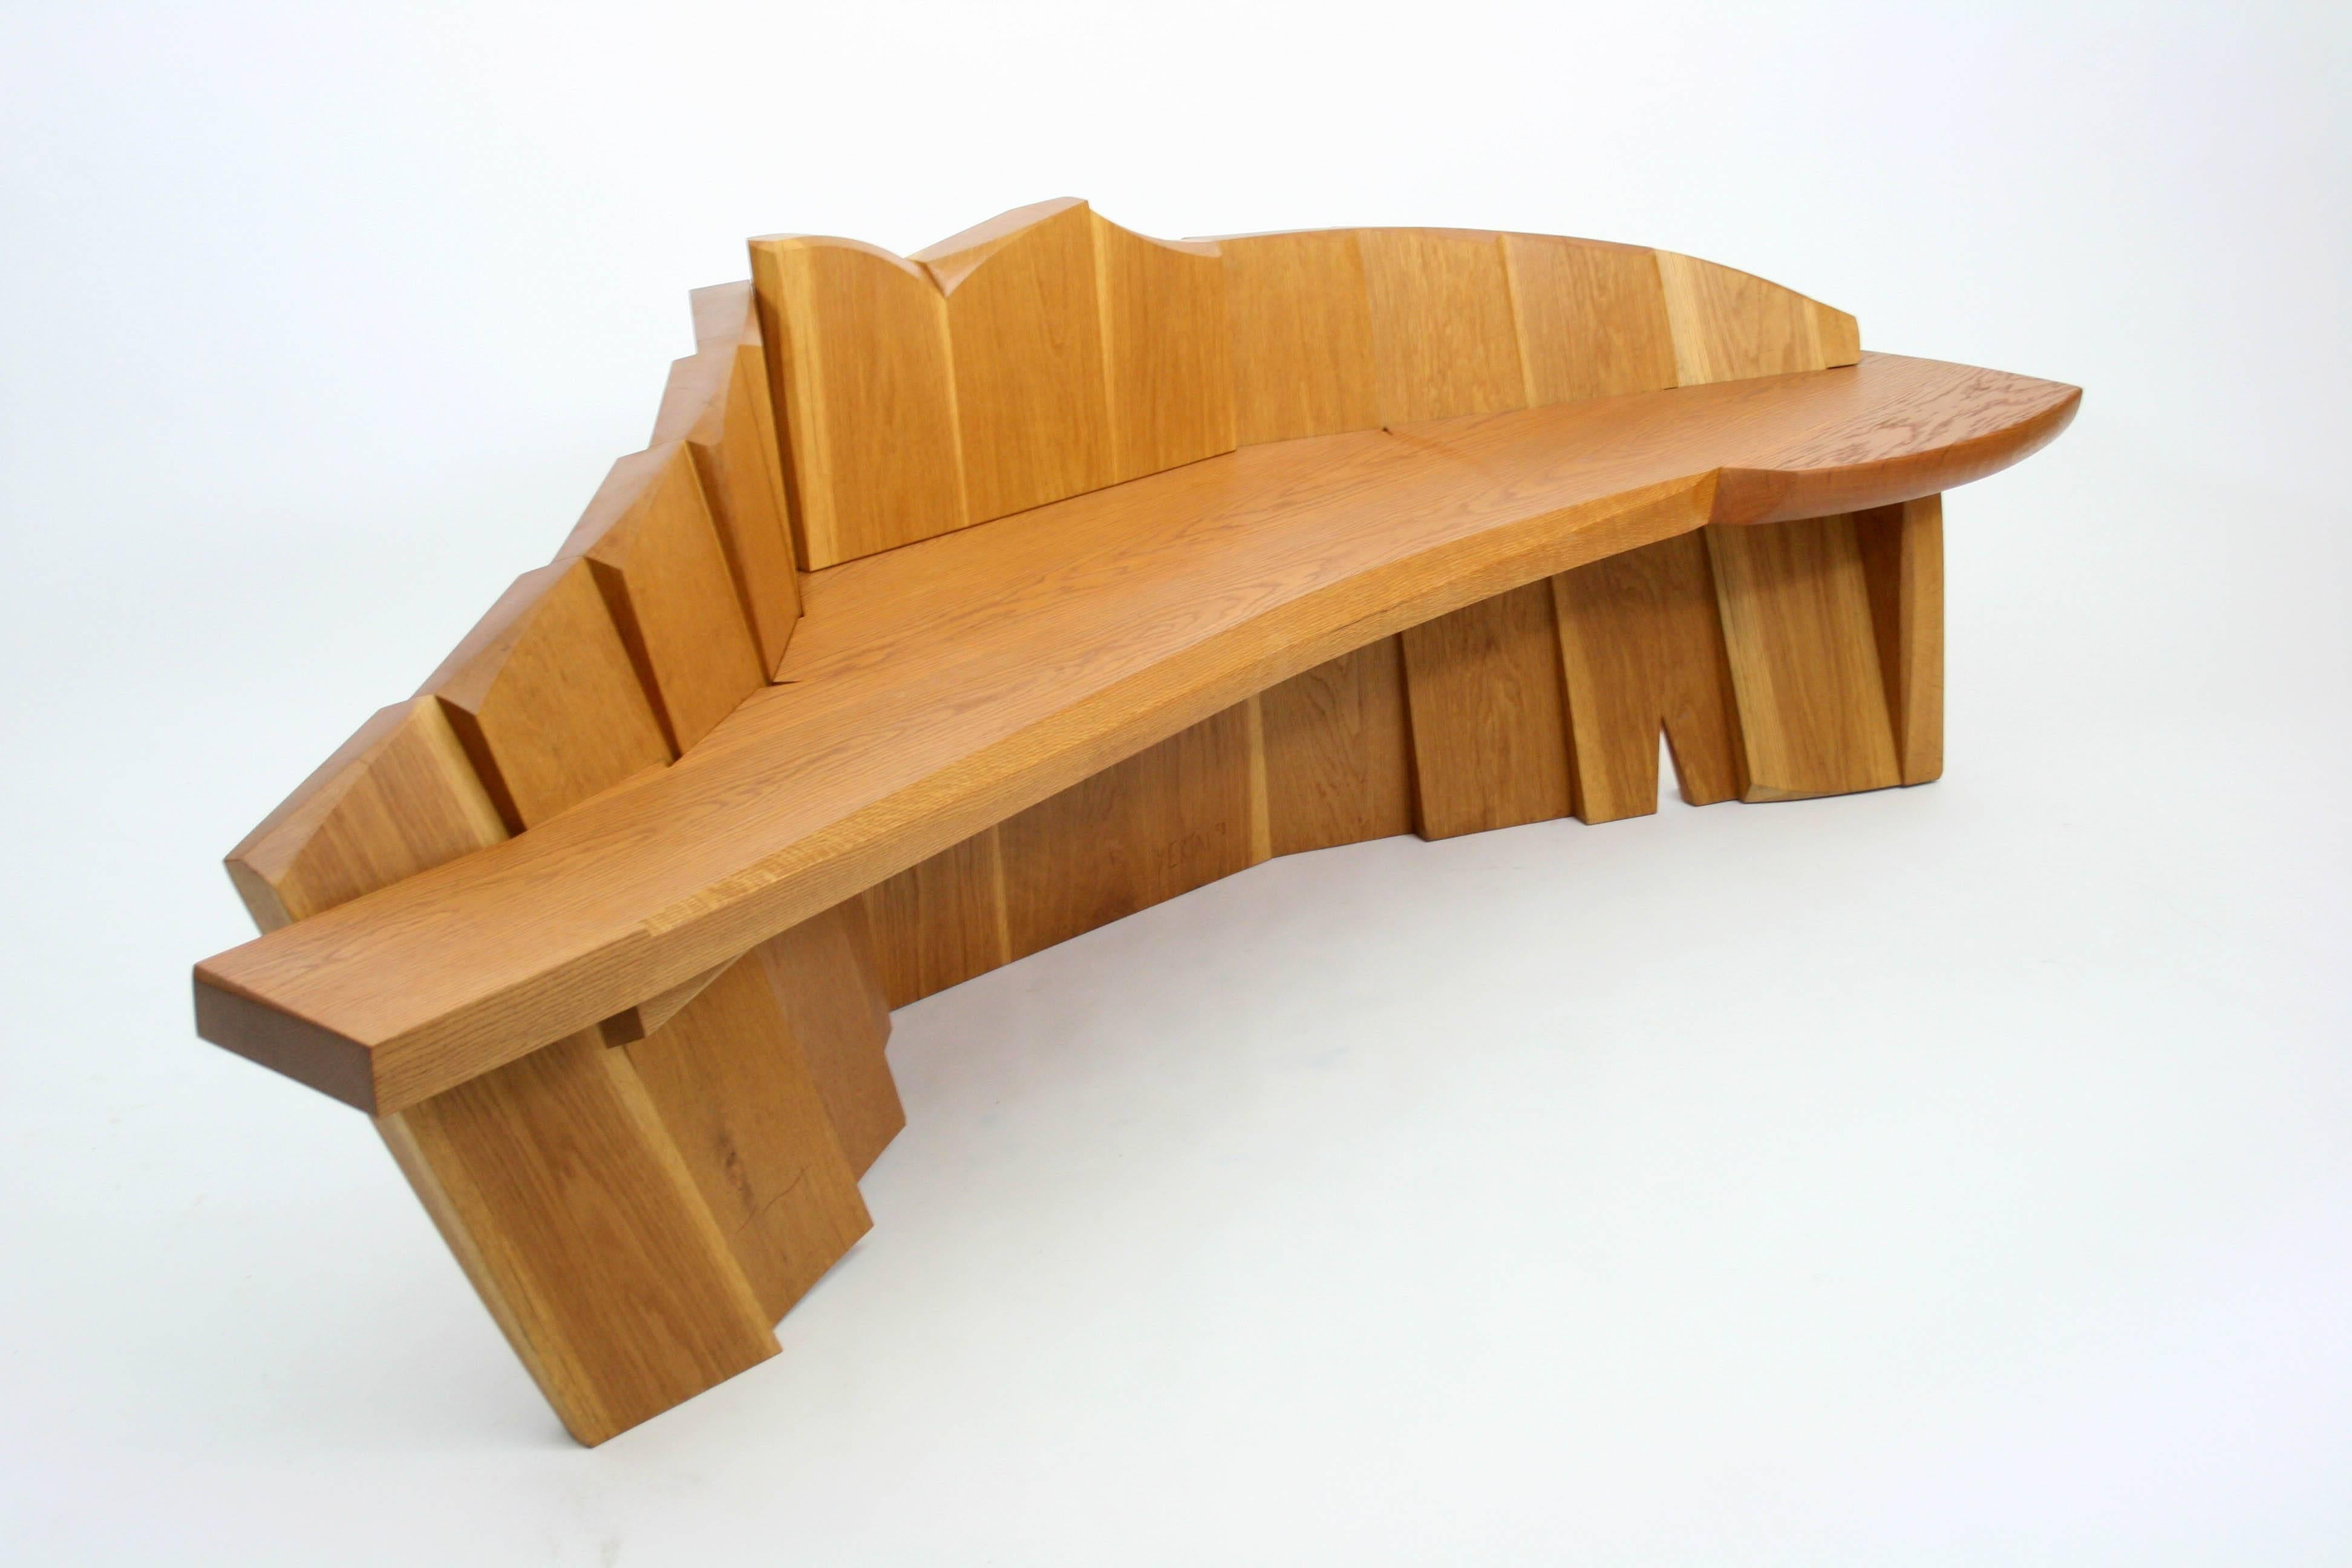 Organic Modern Nico Yektai Studio-Made Sculptural White Oak Bench Signed and Dated by Artist For Sale